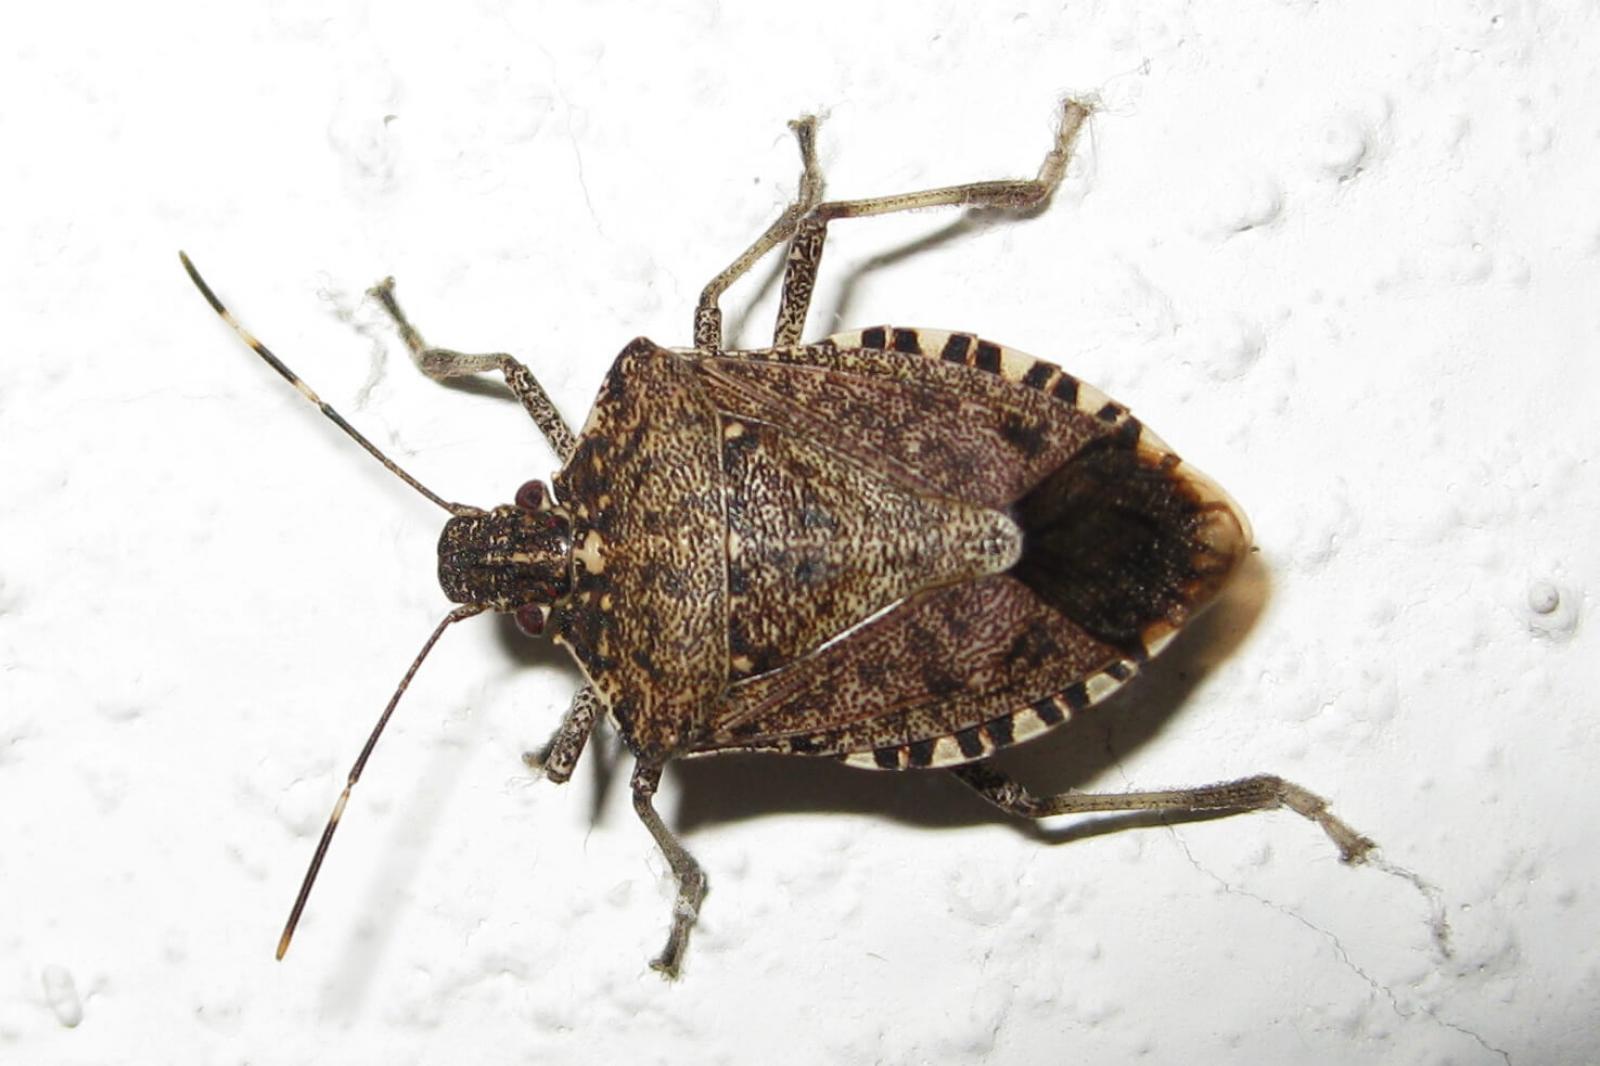 Brown marmorated stink bug confirmed in Ontario